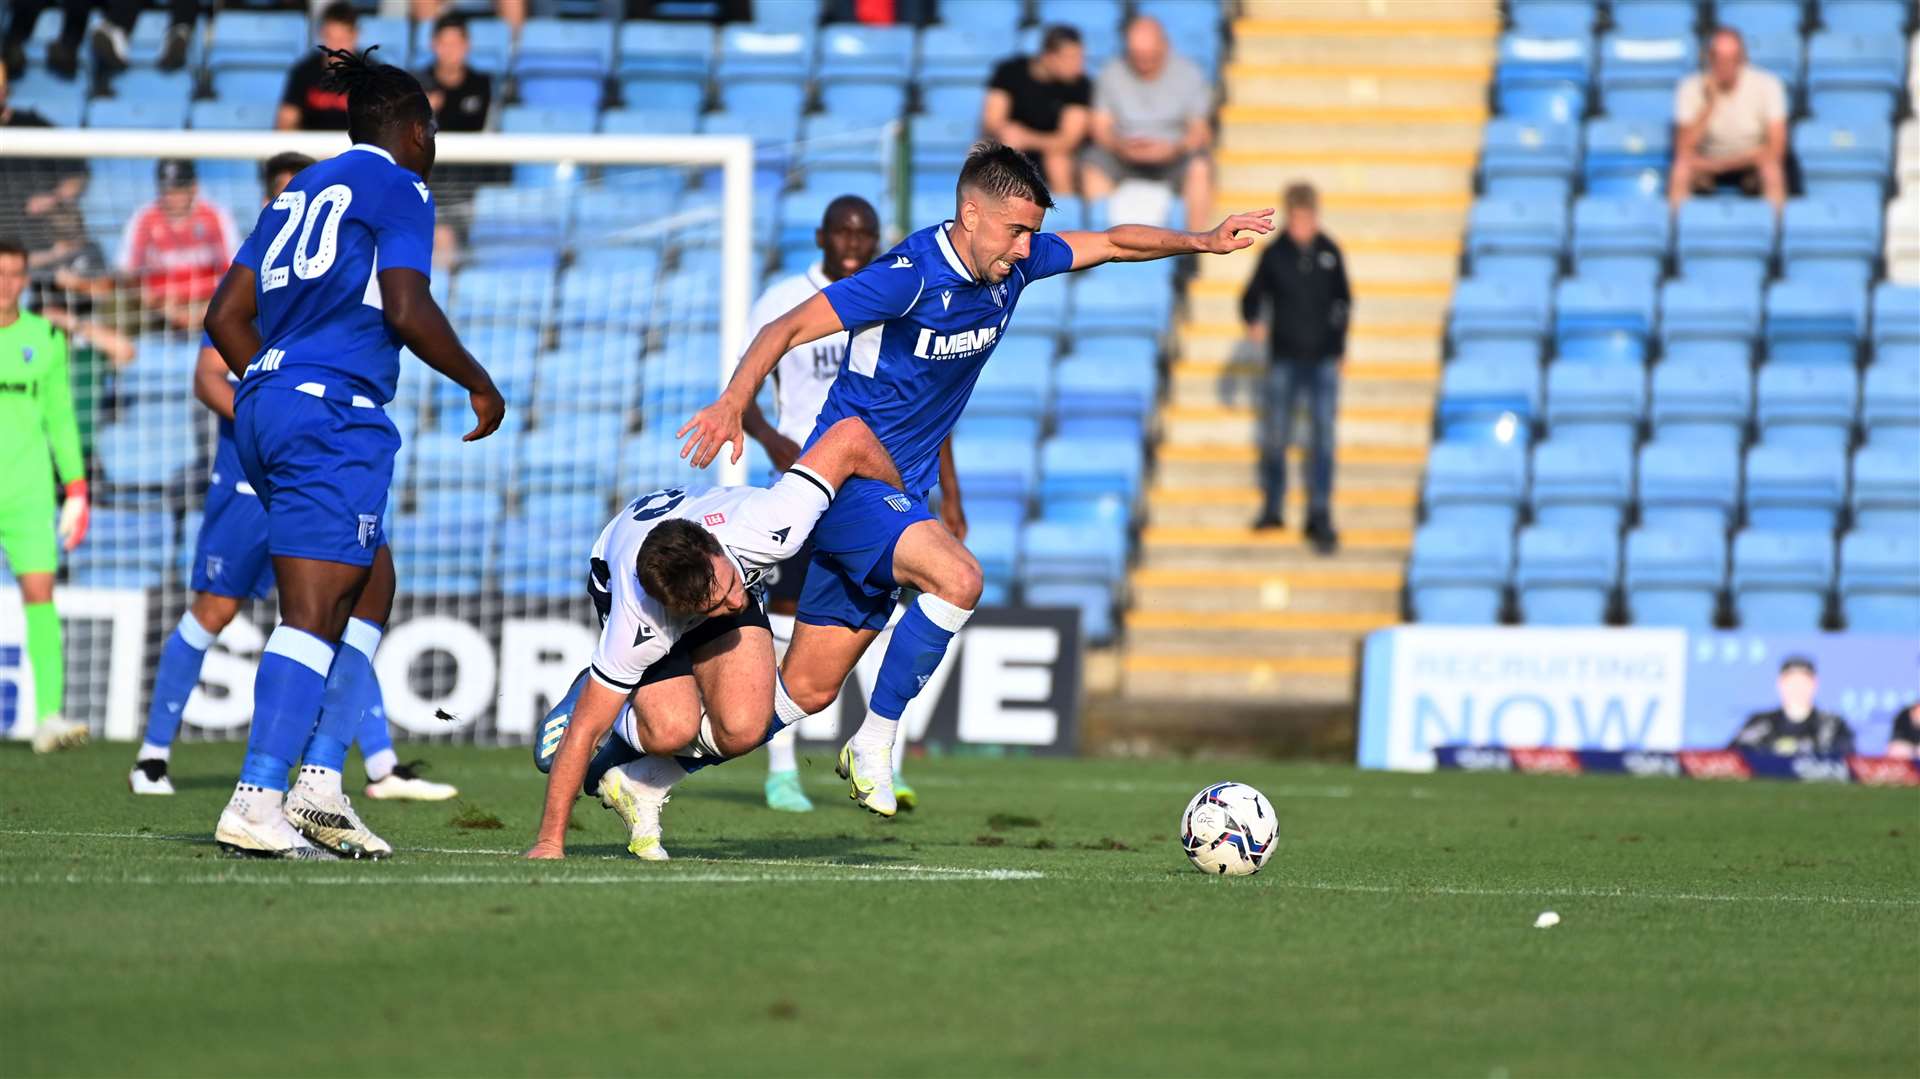 Gillingham's Olly Lee looks to get away from his man in Tuesday's match with Millwall Picture: Barry Goodwin